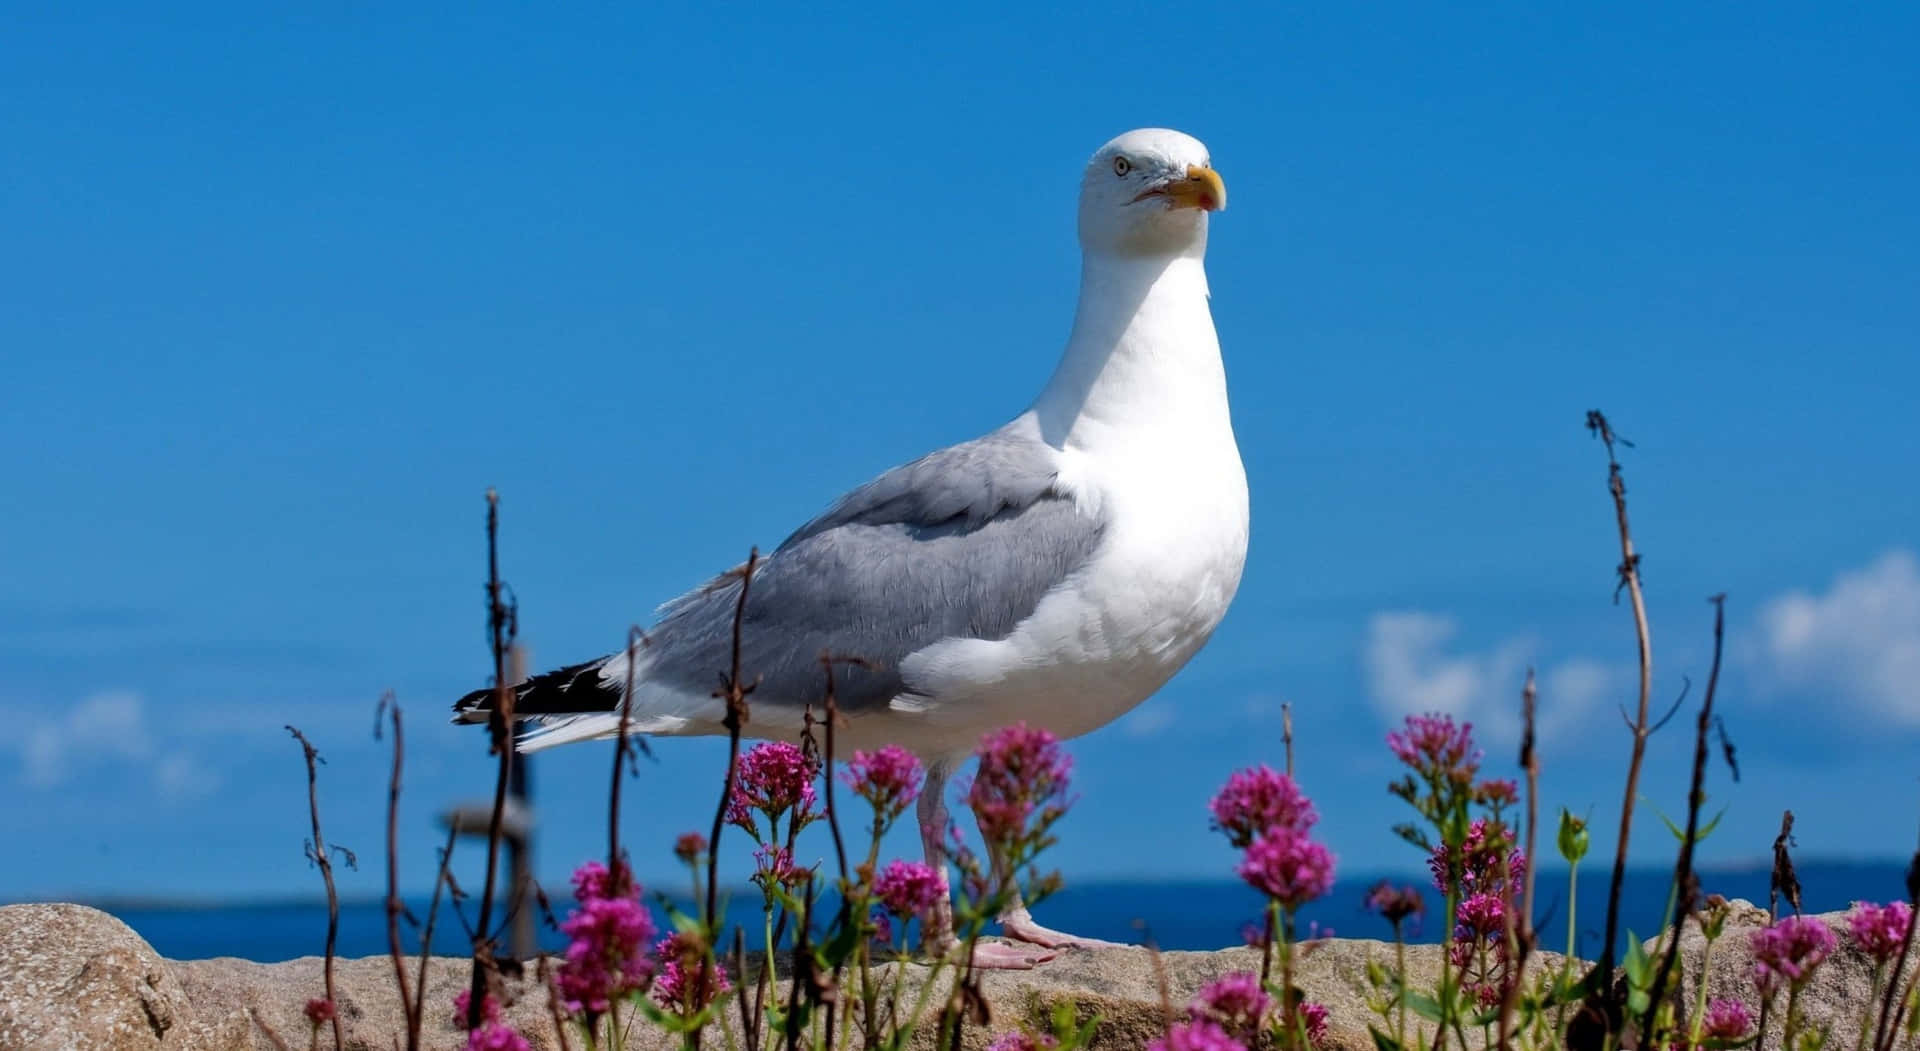 Majestic Seagull Soaring Over The Ocean Background